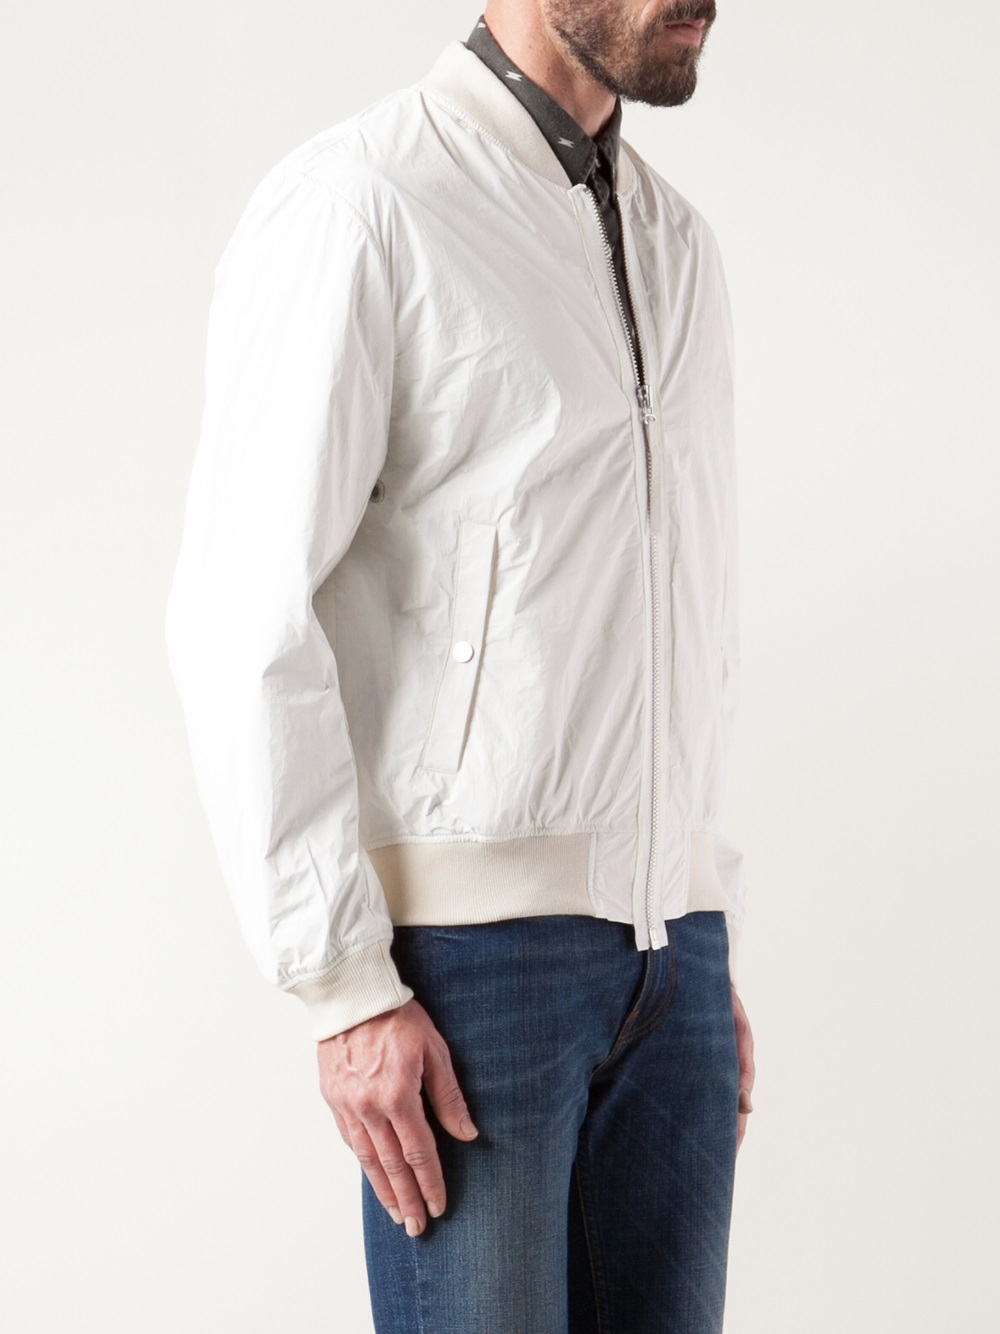 Lyst - Our Legacy Bomber Jacket in White for Men